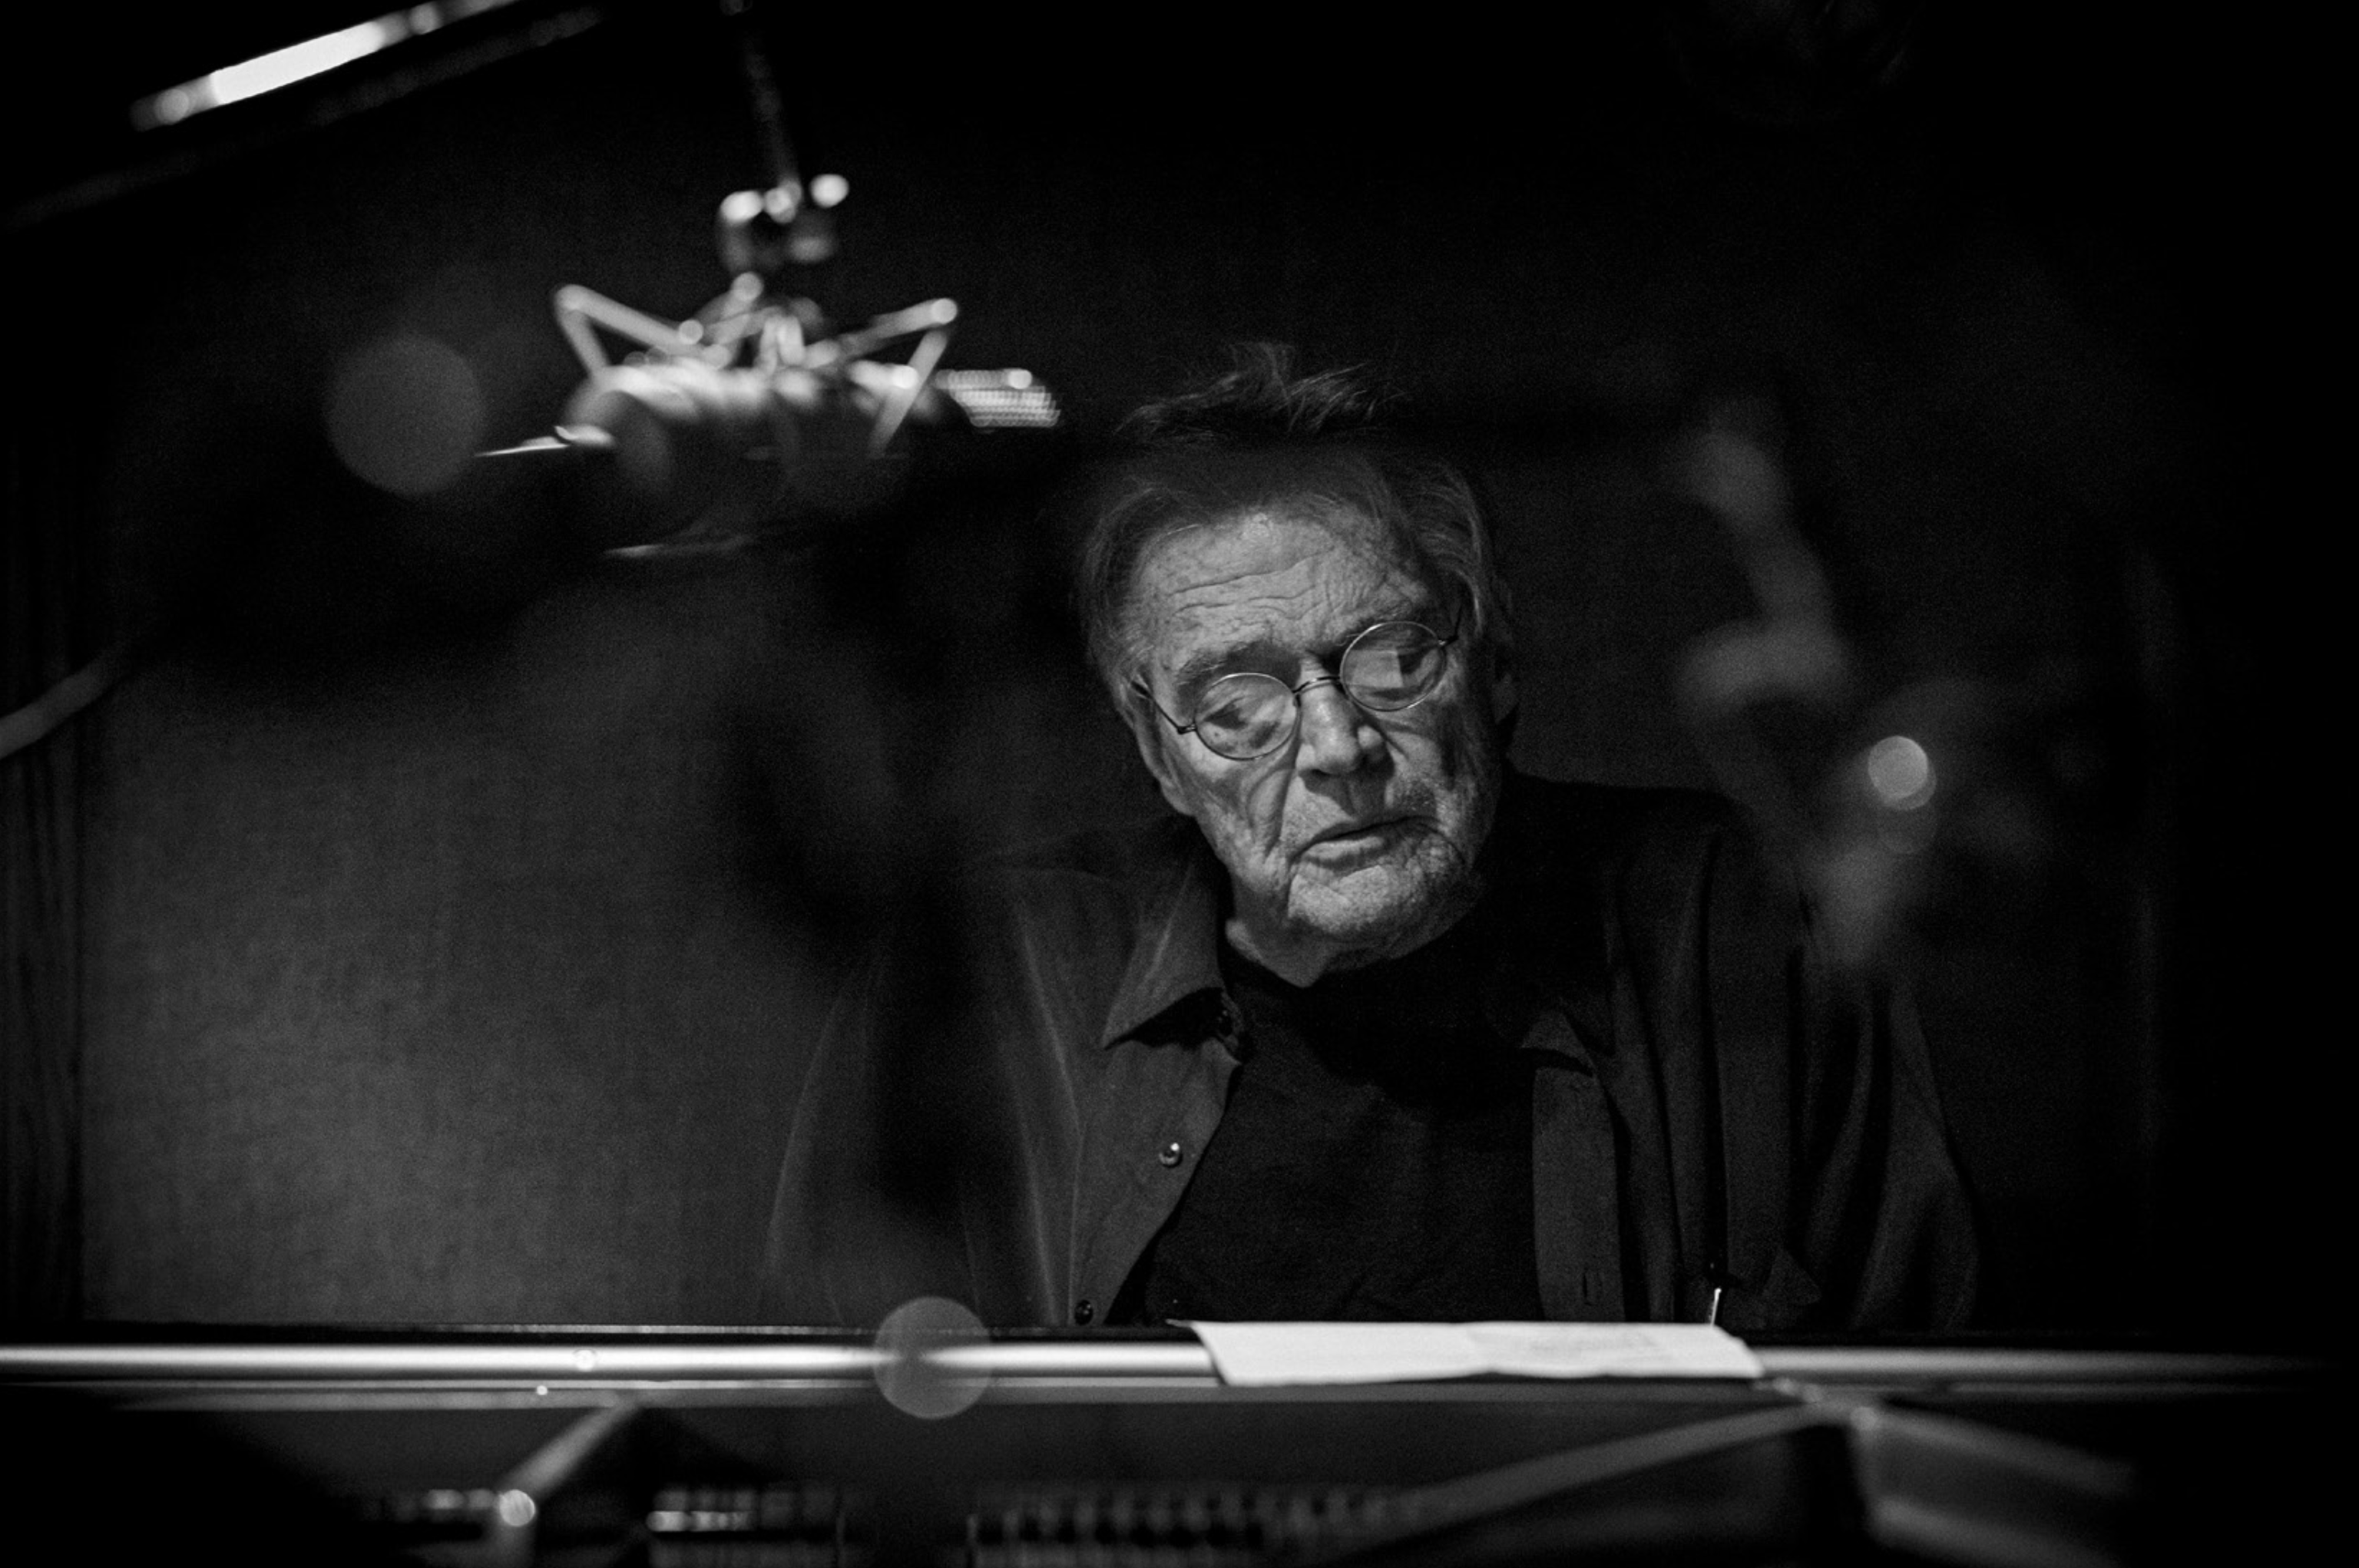 Terry Allen and The Truckload of Art